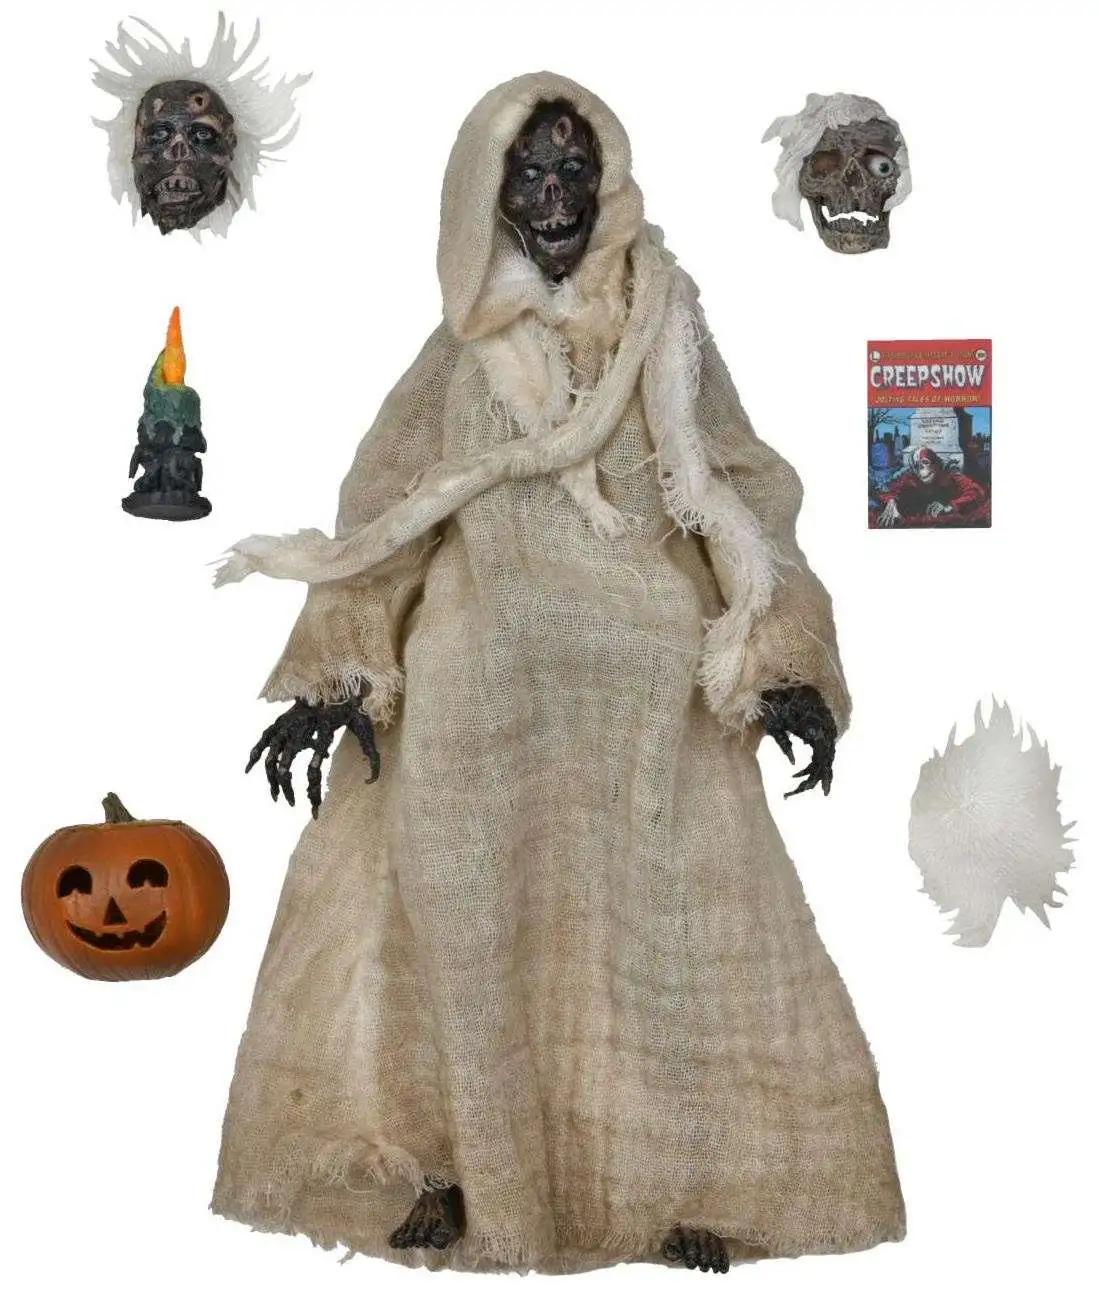 NECA Creepshow 40th Anniversary The Creep Action Figure [Ultimate Version] (Pre-Order ships October)